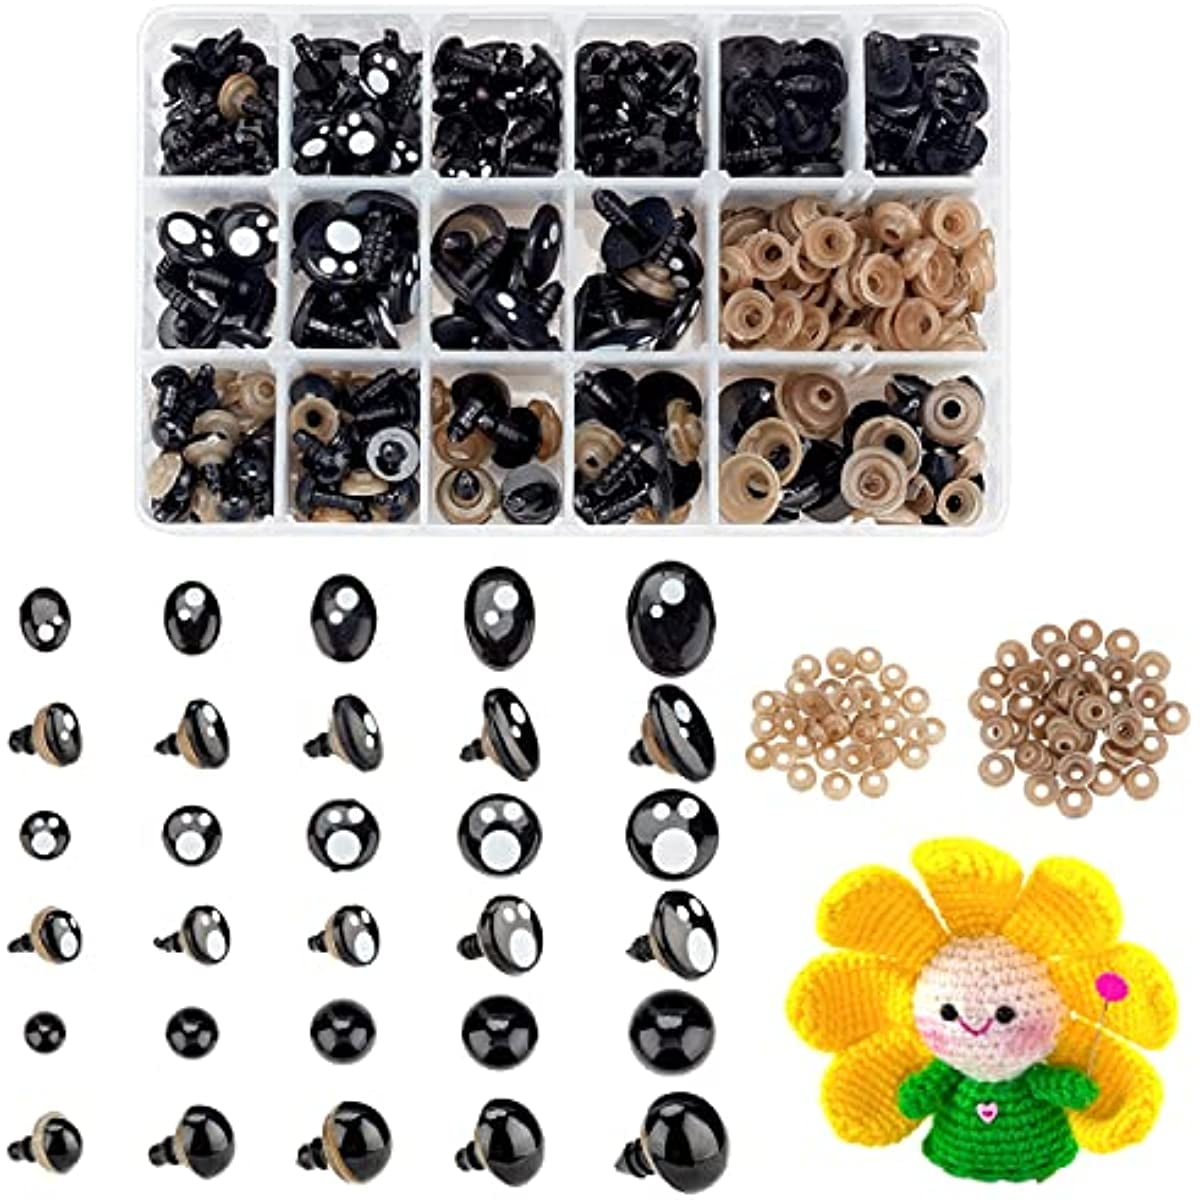 300pcs Black Crafts Eyes 5 Sizes Animal Eyes Round Domed Buttons Black  Mushroom Eyes Sewing Shank Button Solid Eyes for Crochet Puppet Plush  Stuffed Animals Clothing Making 